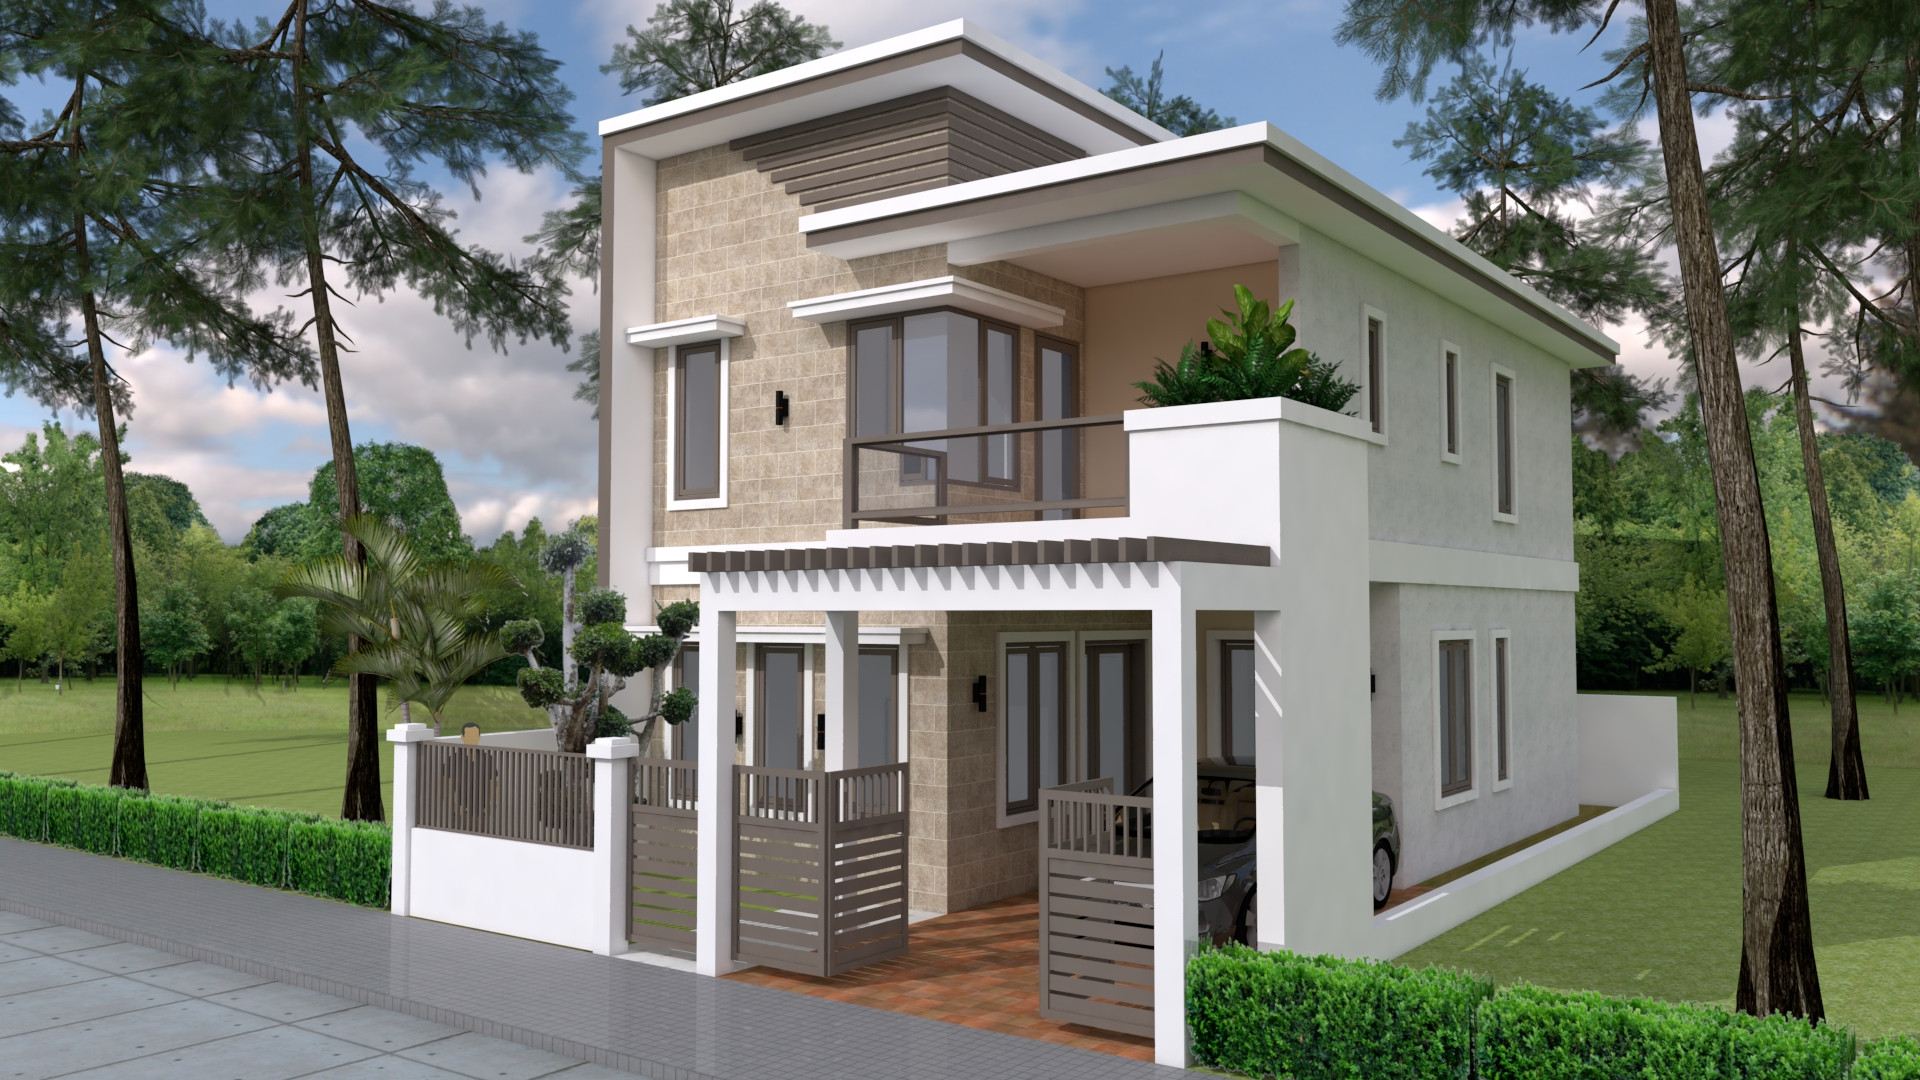 Small 4 Bedroom House Plans
 Home Design Plan 7x12m with 4 Bedrooms Plot 8x15